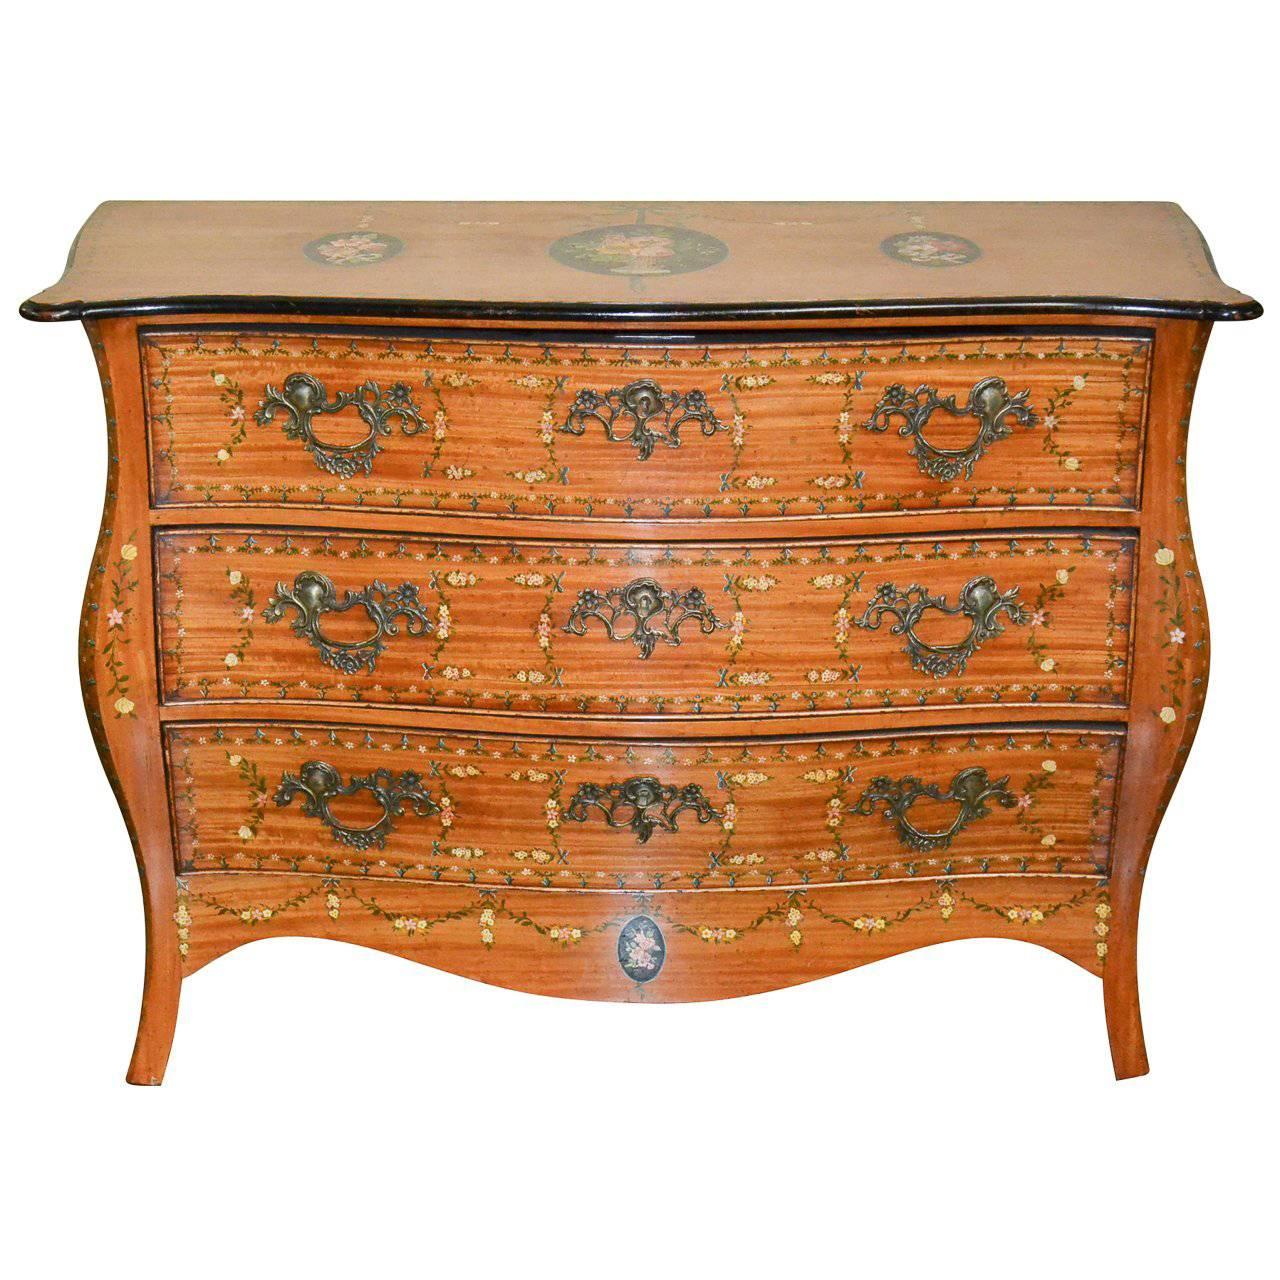 19th Century English Hand-Painted Commode